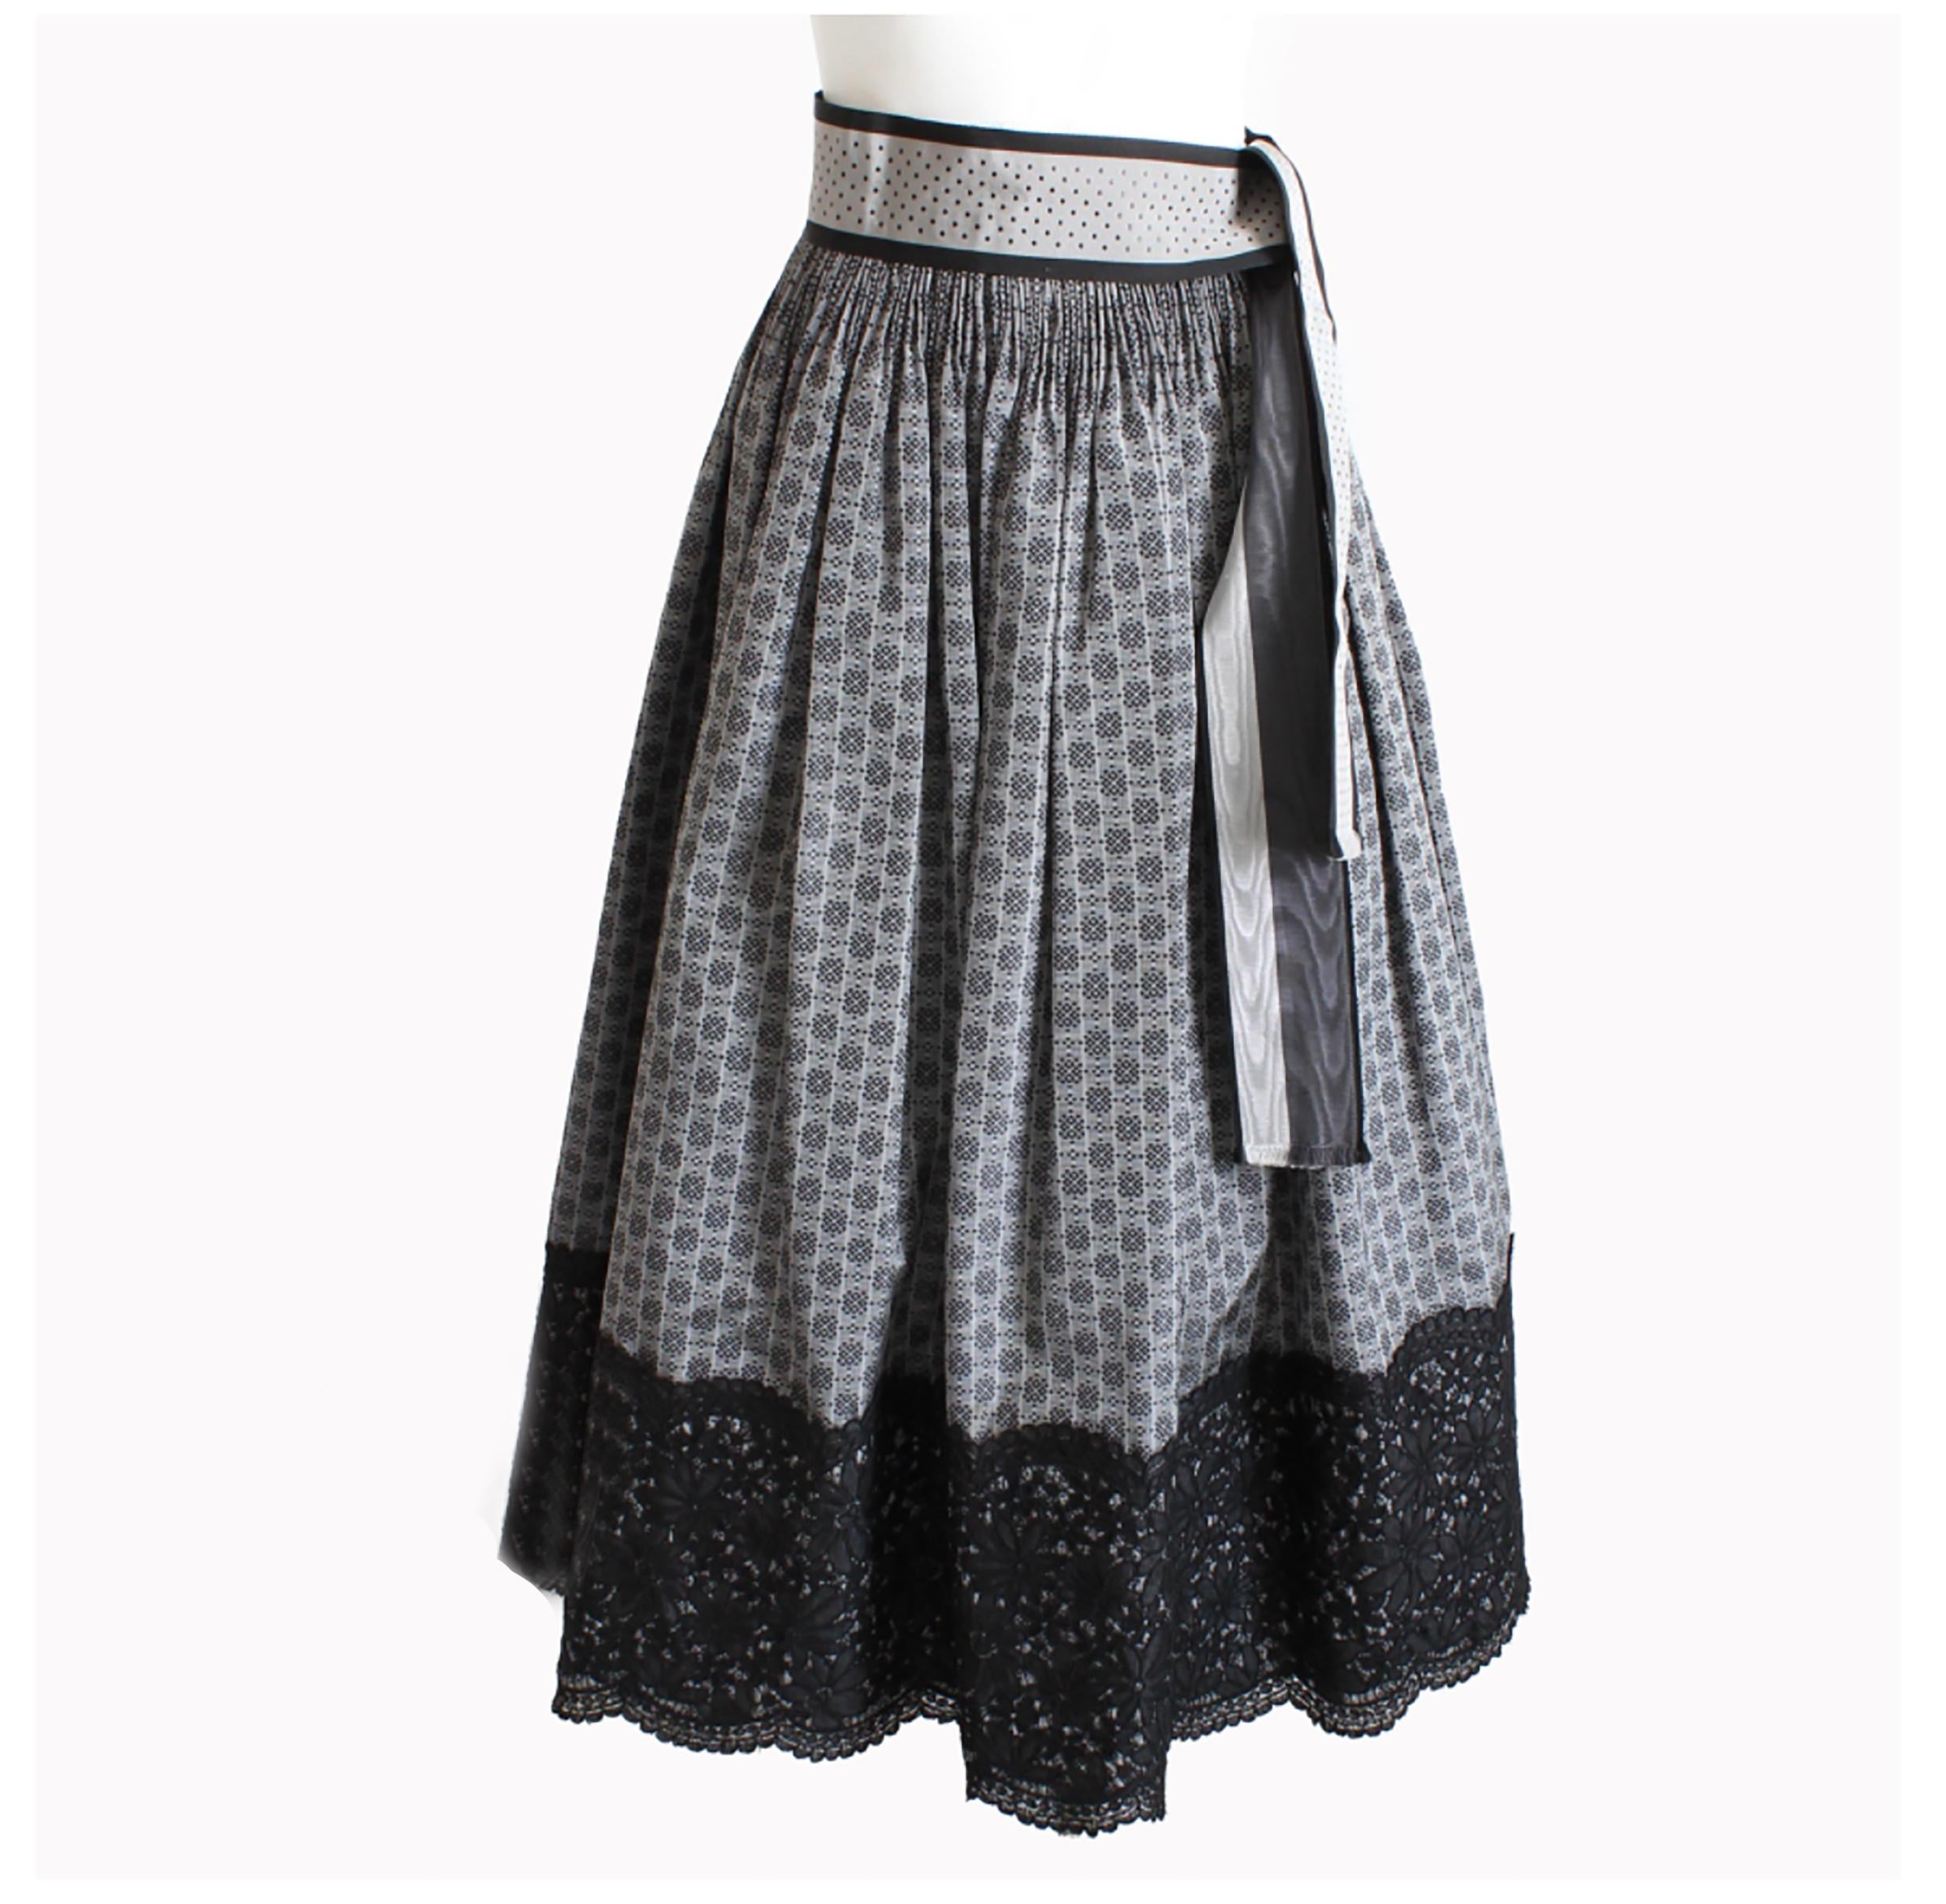 Gorgeous Geoffrey Beene floor length formal skirt with matching sash belt, likely made in the late 70s.  Made from what we believe is a silk blend taffeta (no content label) in an abstract dotted gray and black print, it has a shirred waist and